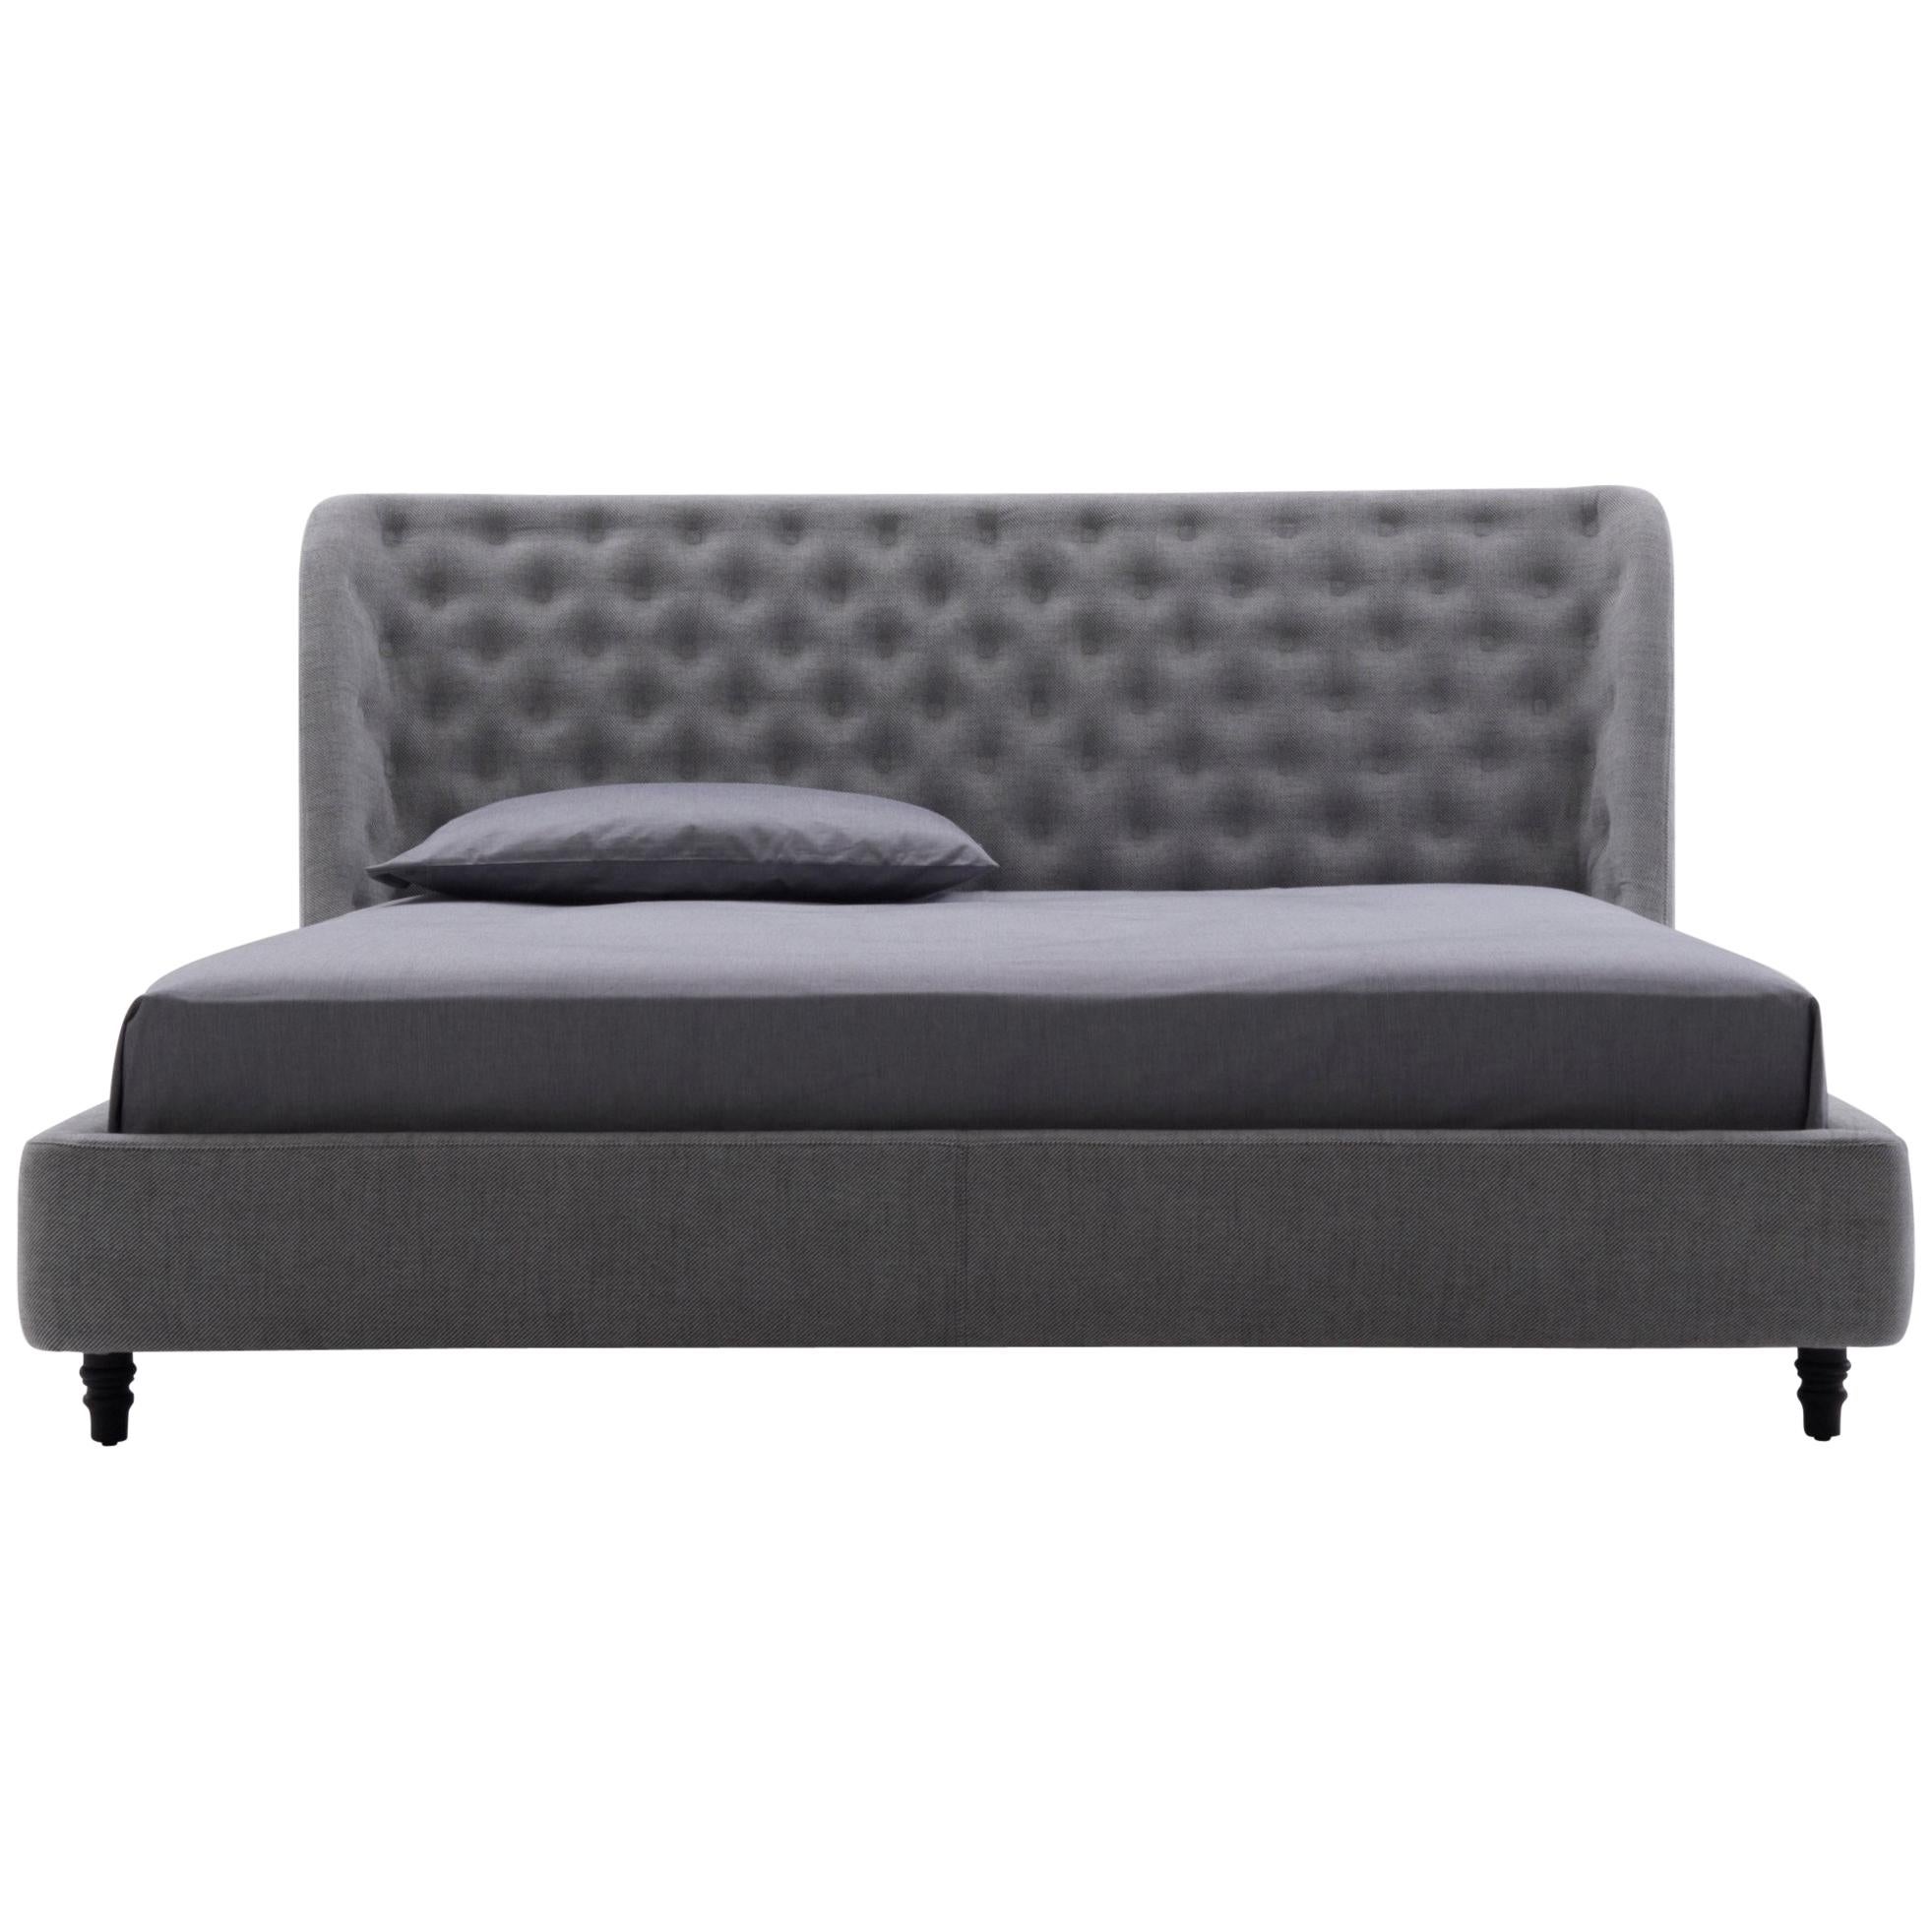 Nube Italia Chloe Bed in Gray by Marco Corti For Sale